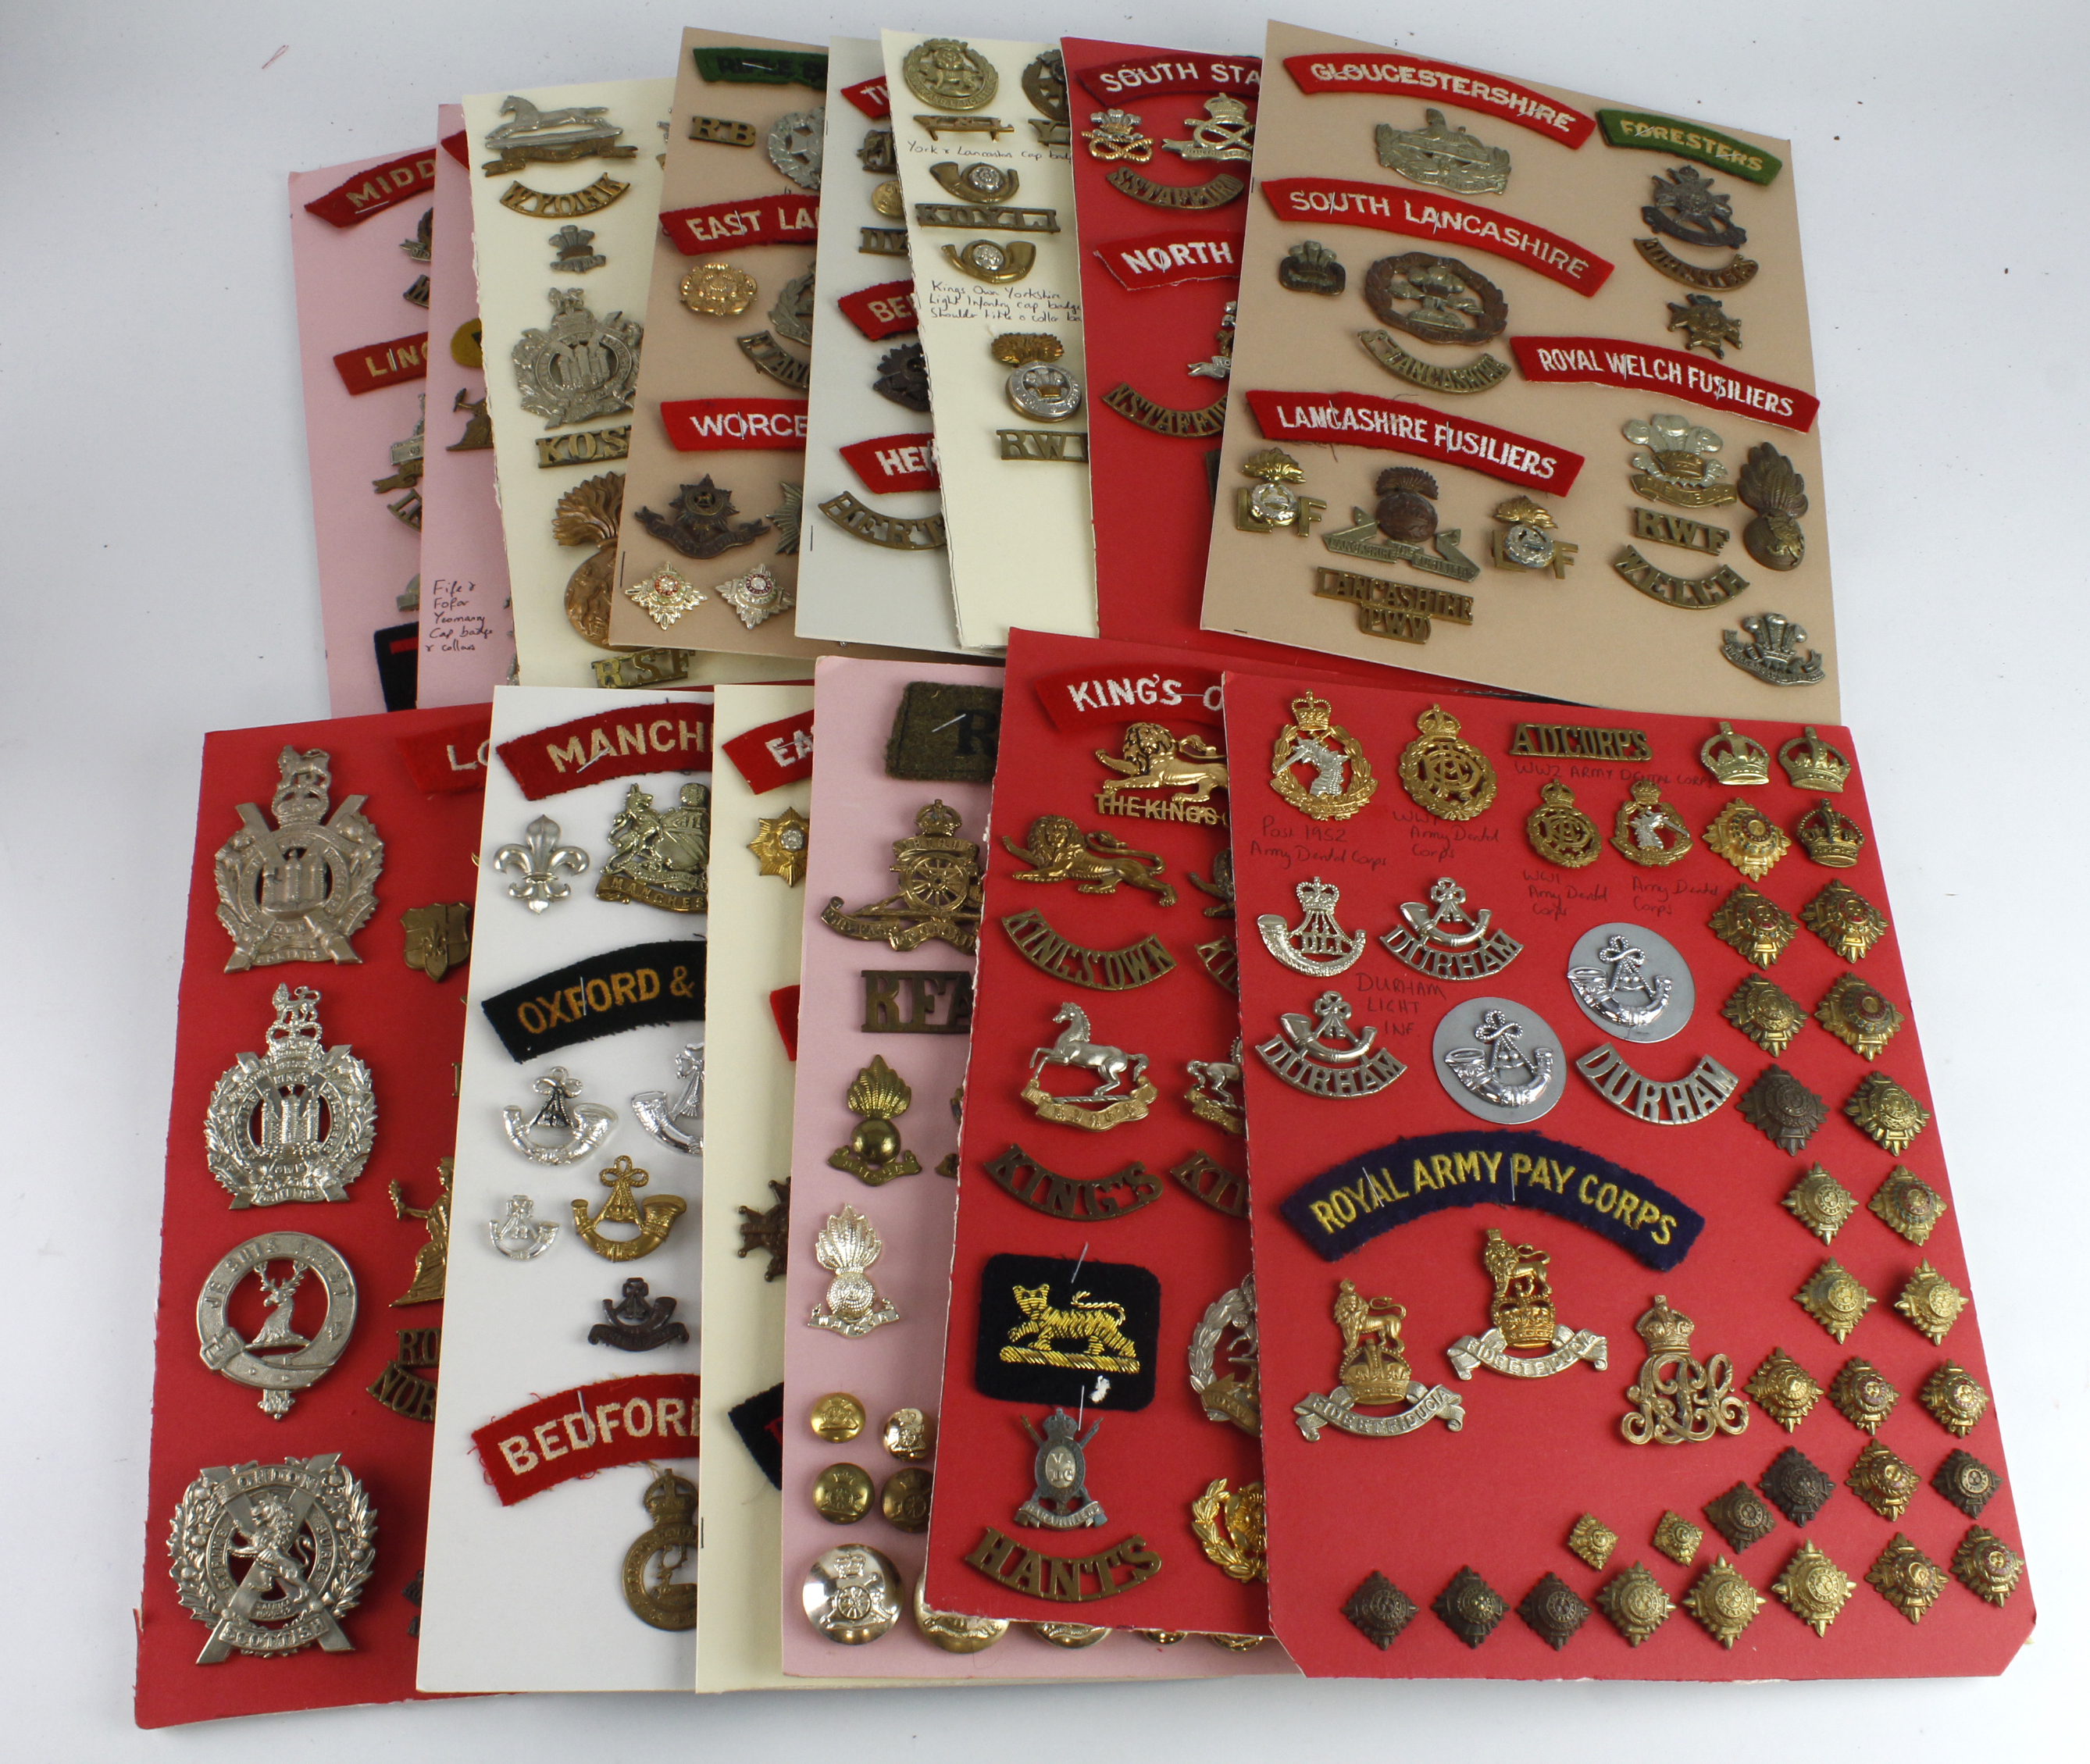 Cap badges / buttons / collars / metal and cloth title collection mounted on boards, wide range of